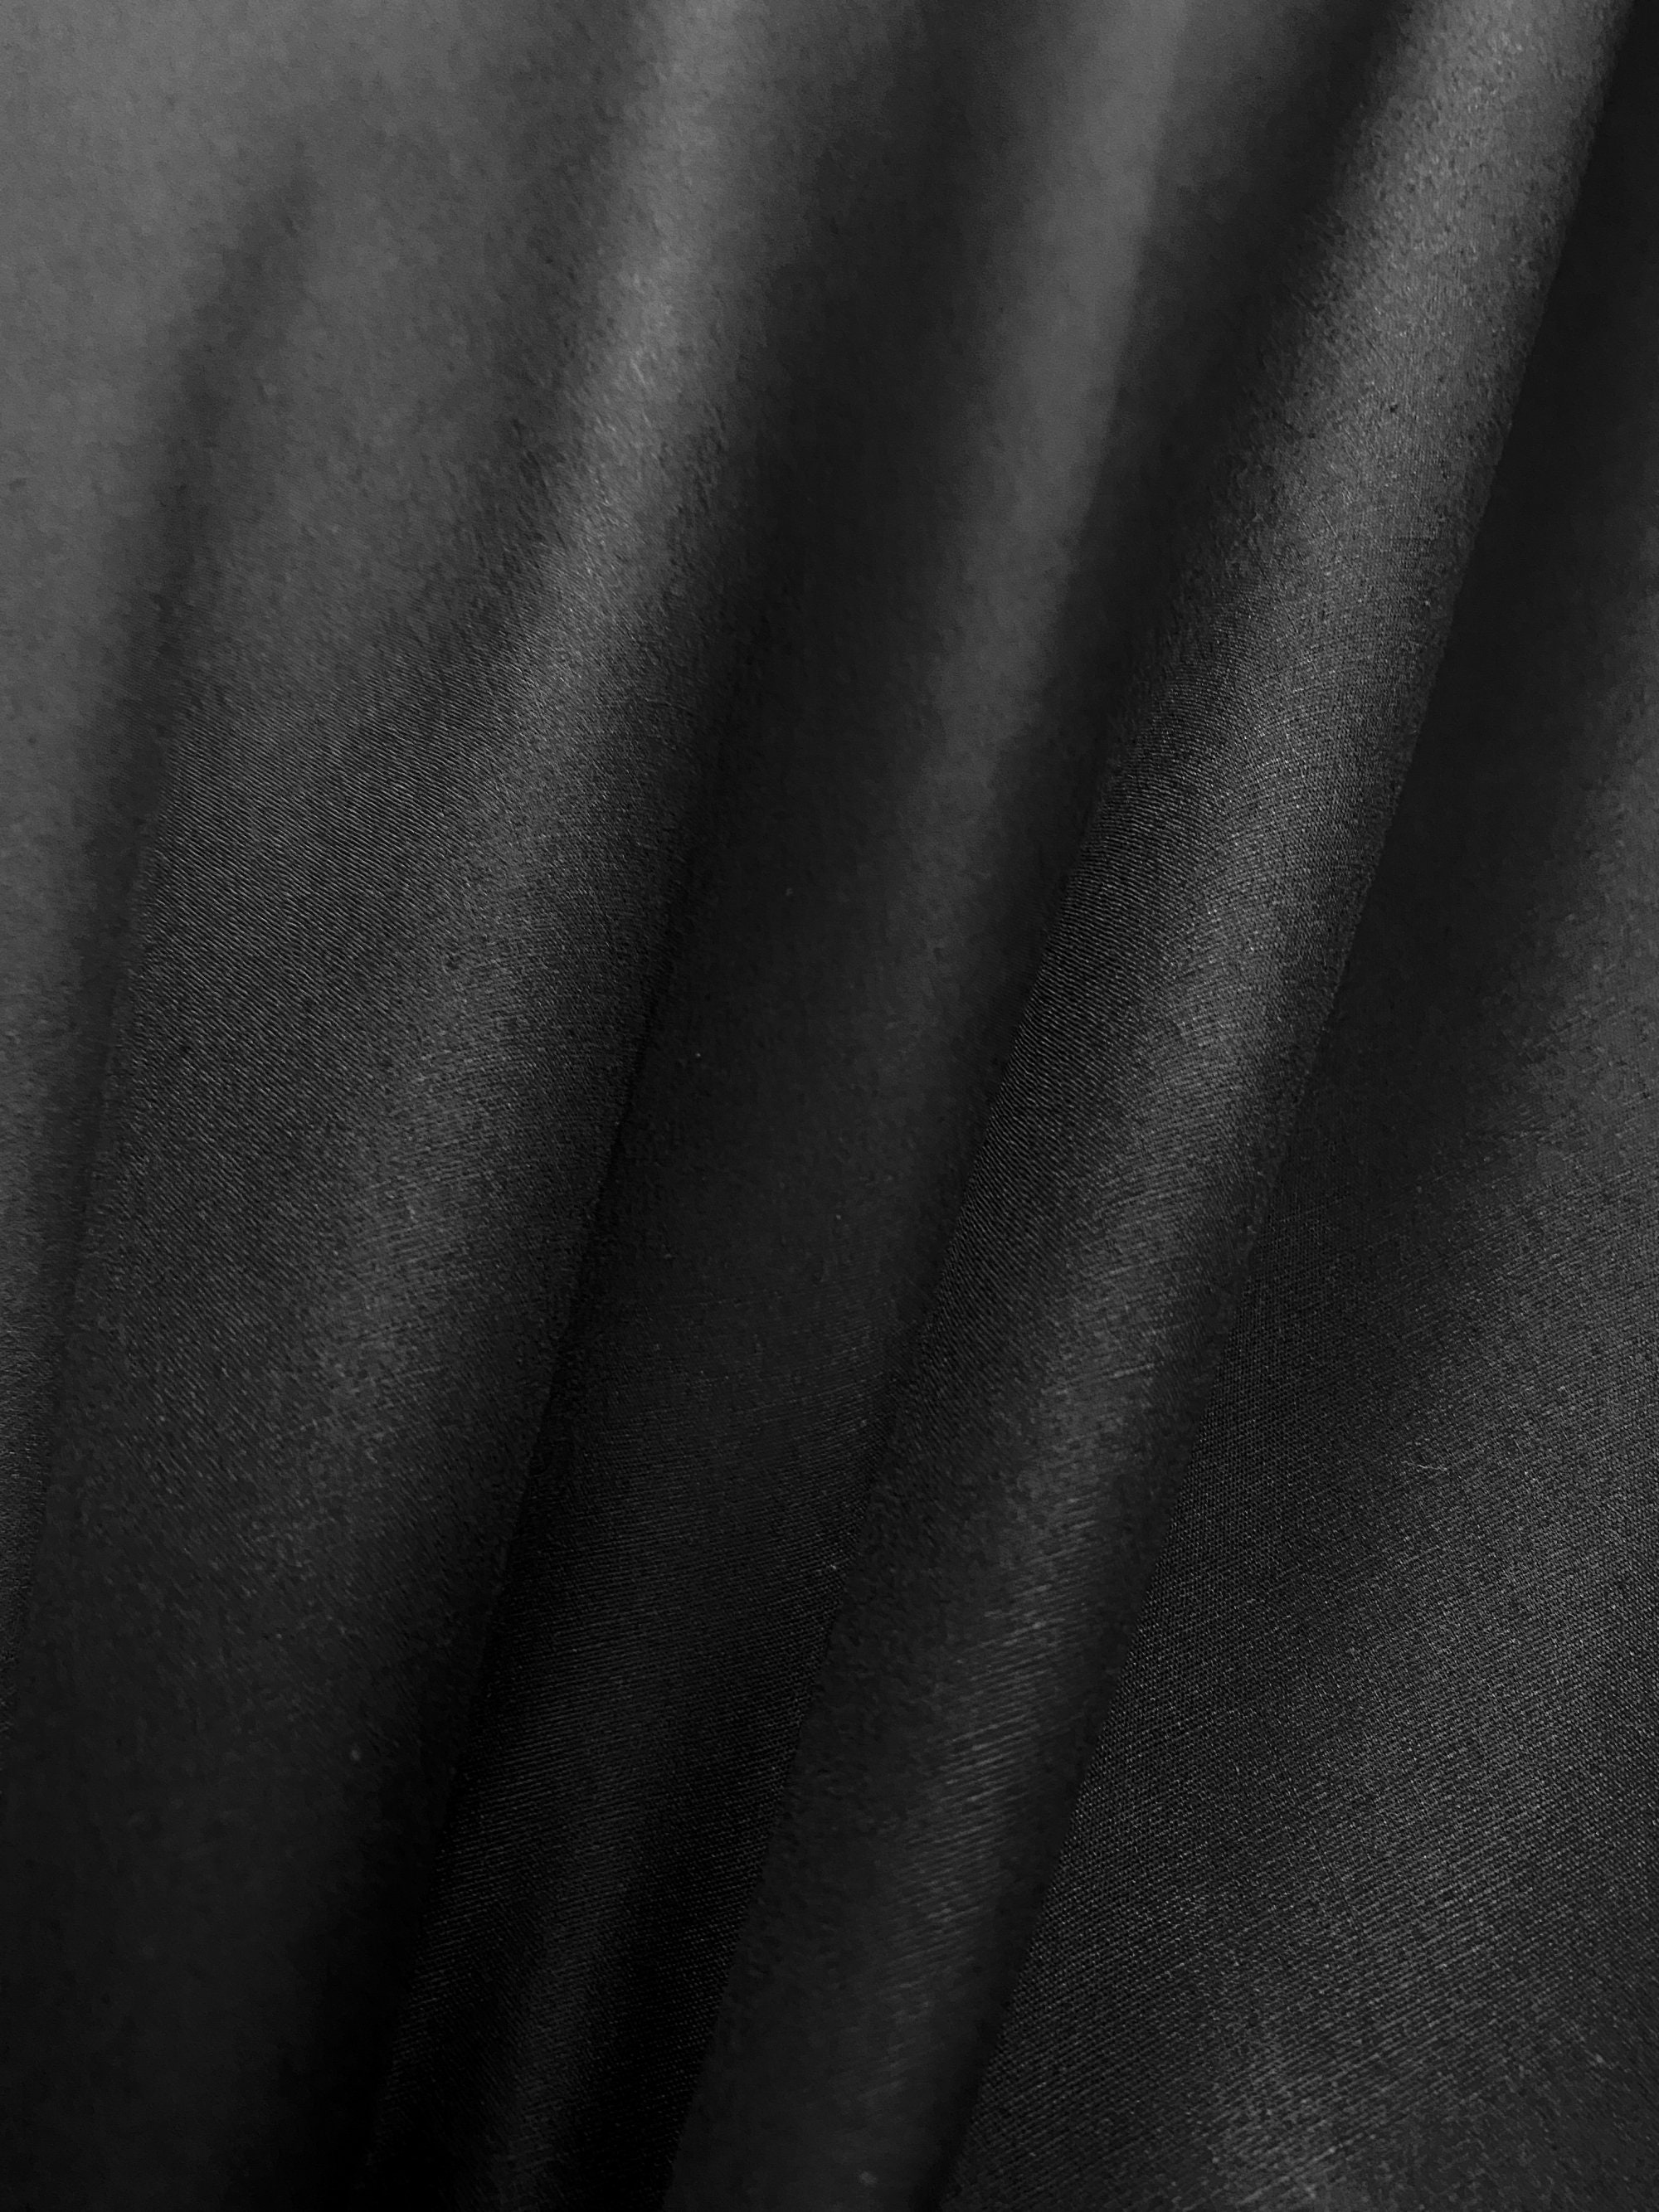 Black 100% Cotton Fabric Material 44w BTY for Face Masks | Etsy